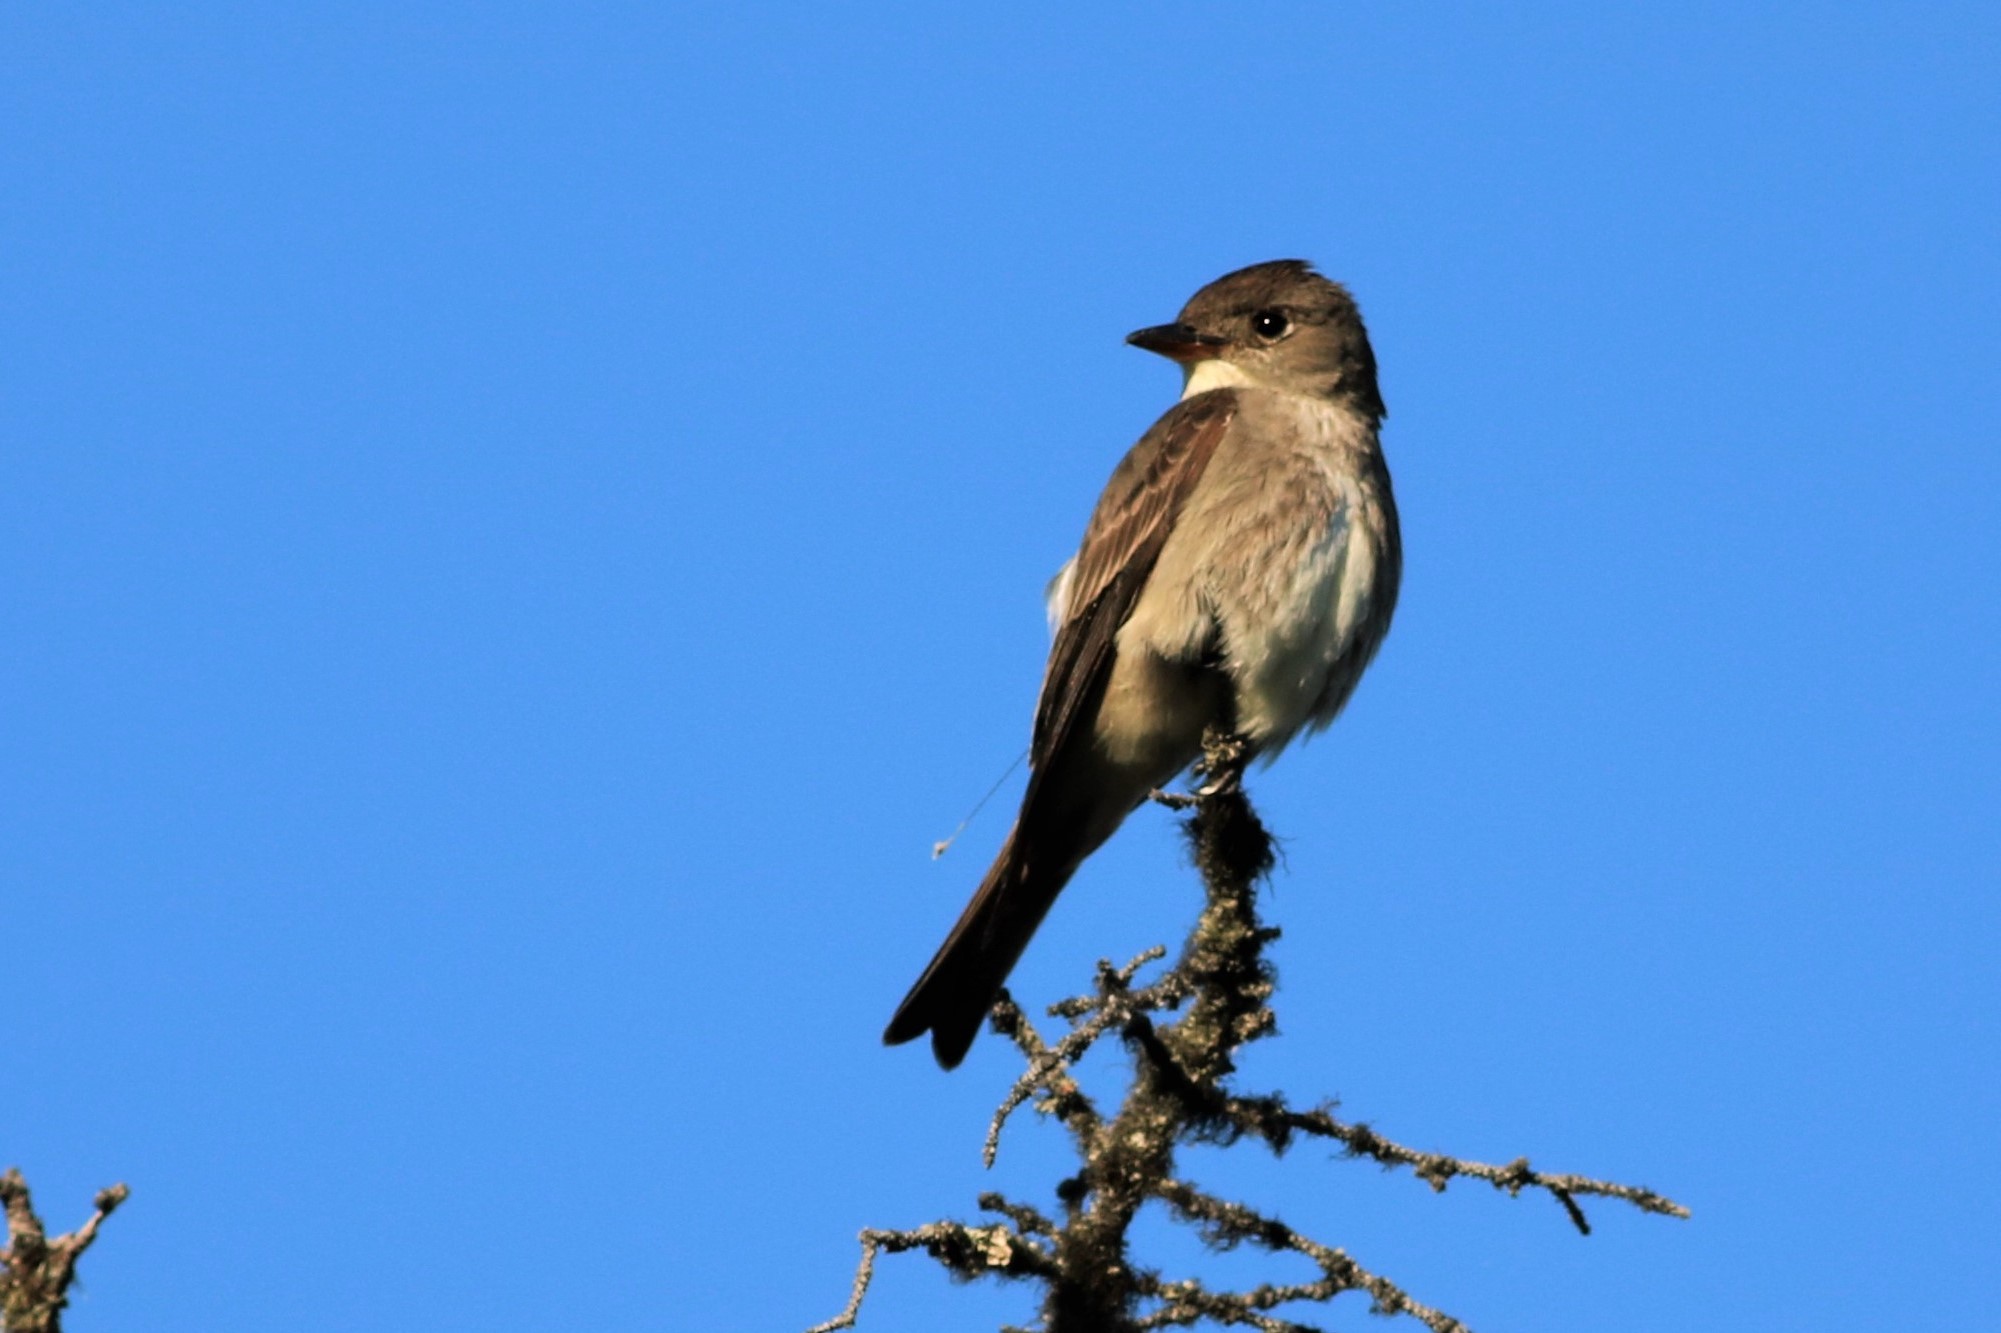 An olive-colored songbird sits on the top of a dead evergreen tree.